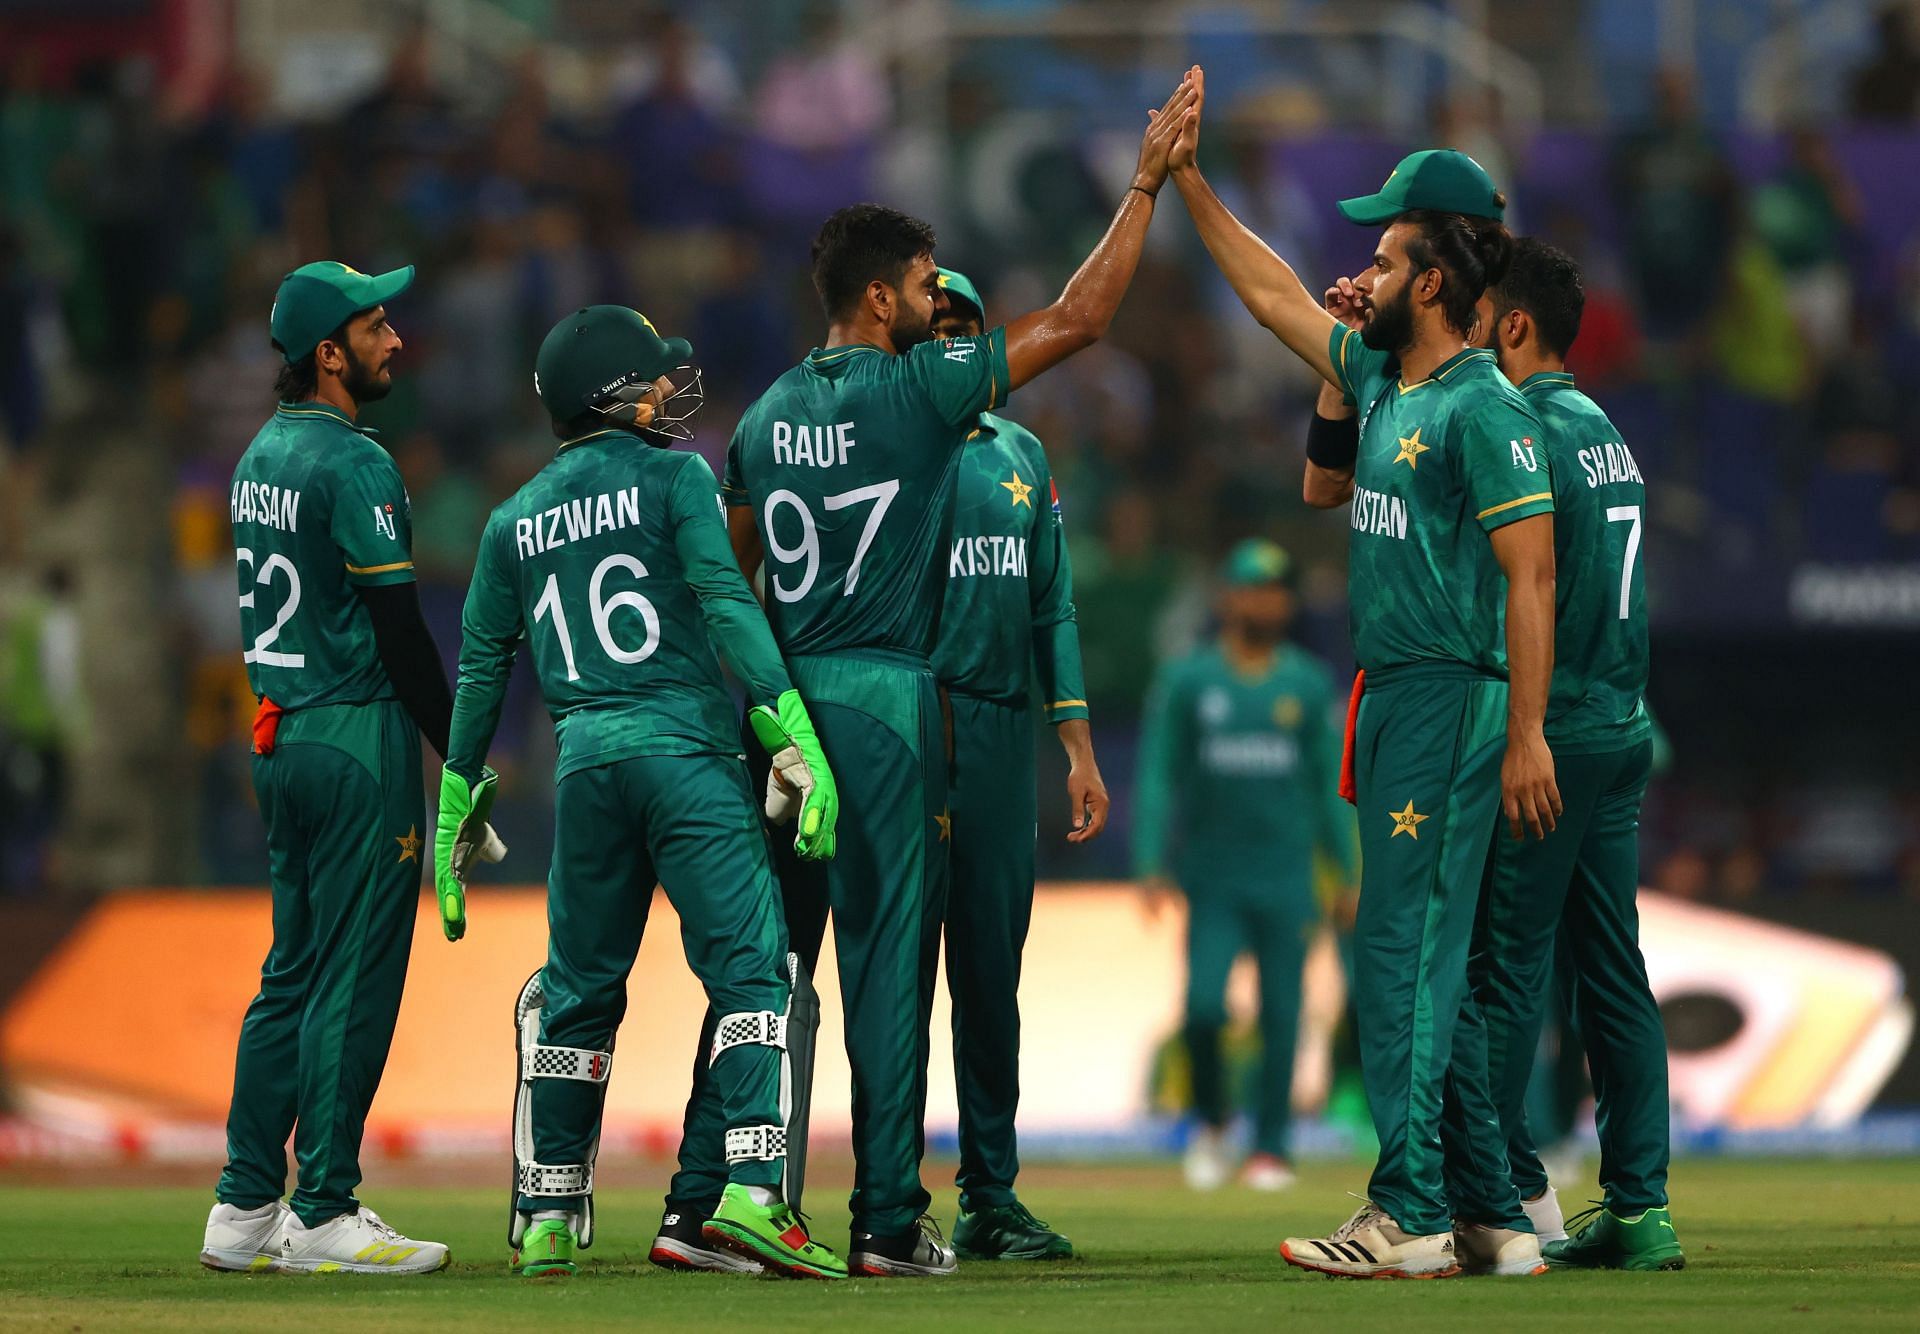 Pakistan sealed a semifinal spot in the T20 World Cup 2021.